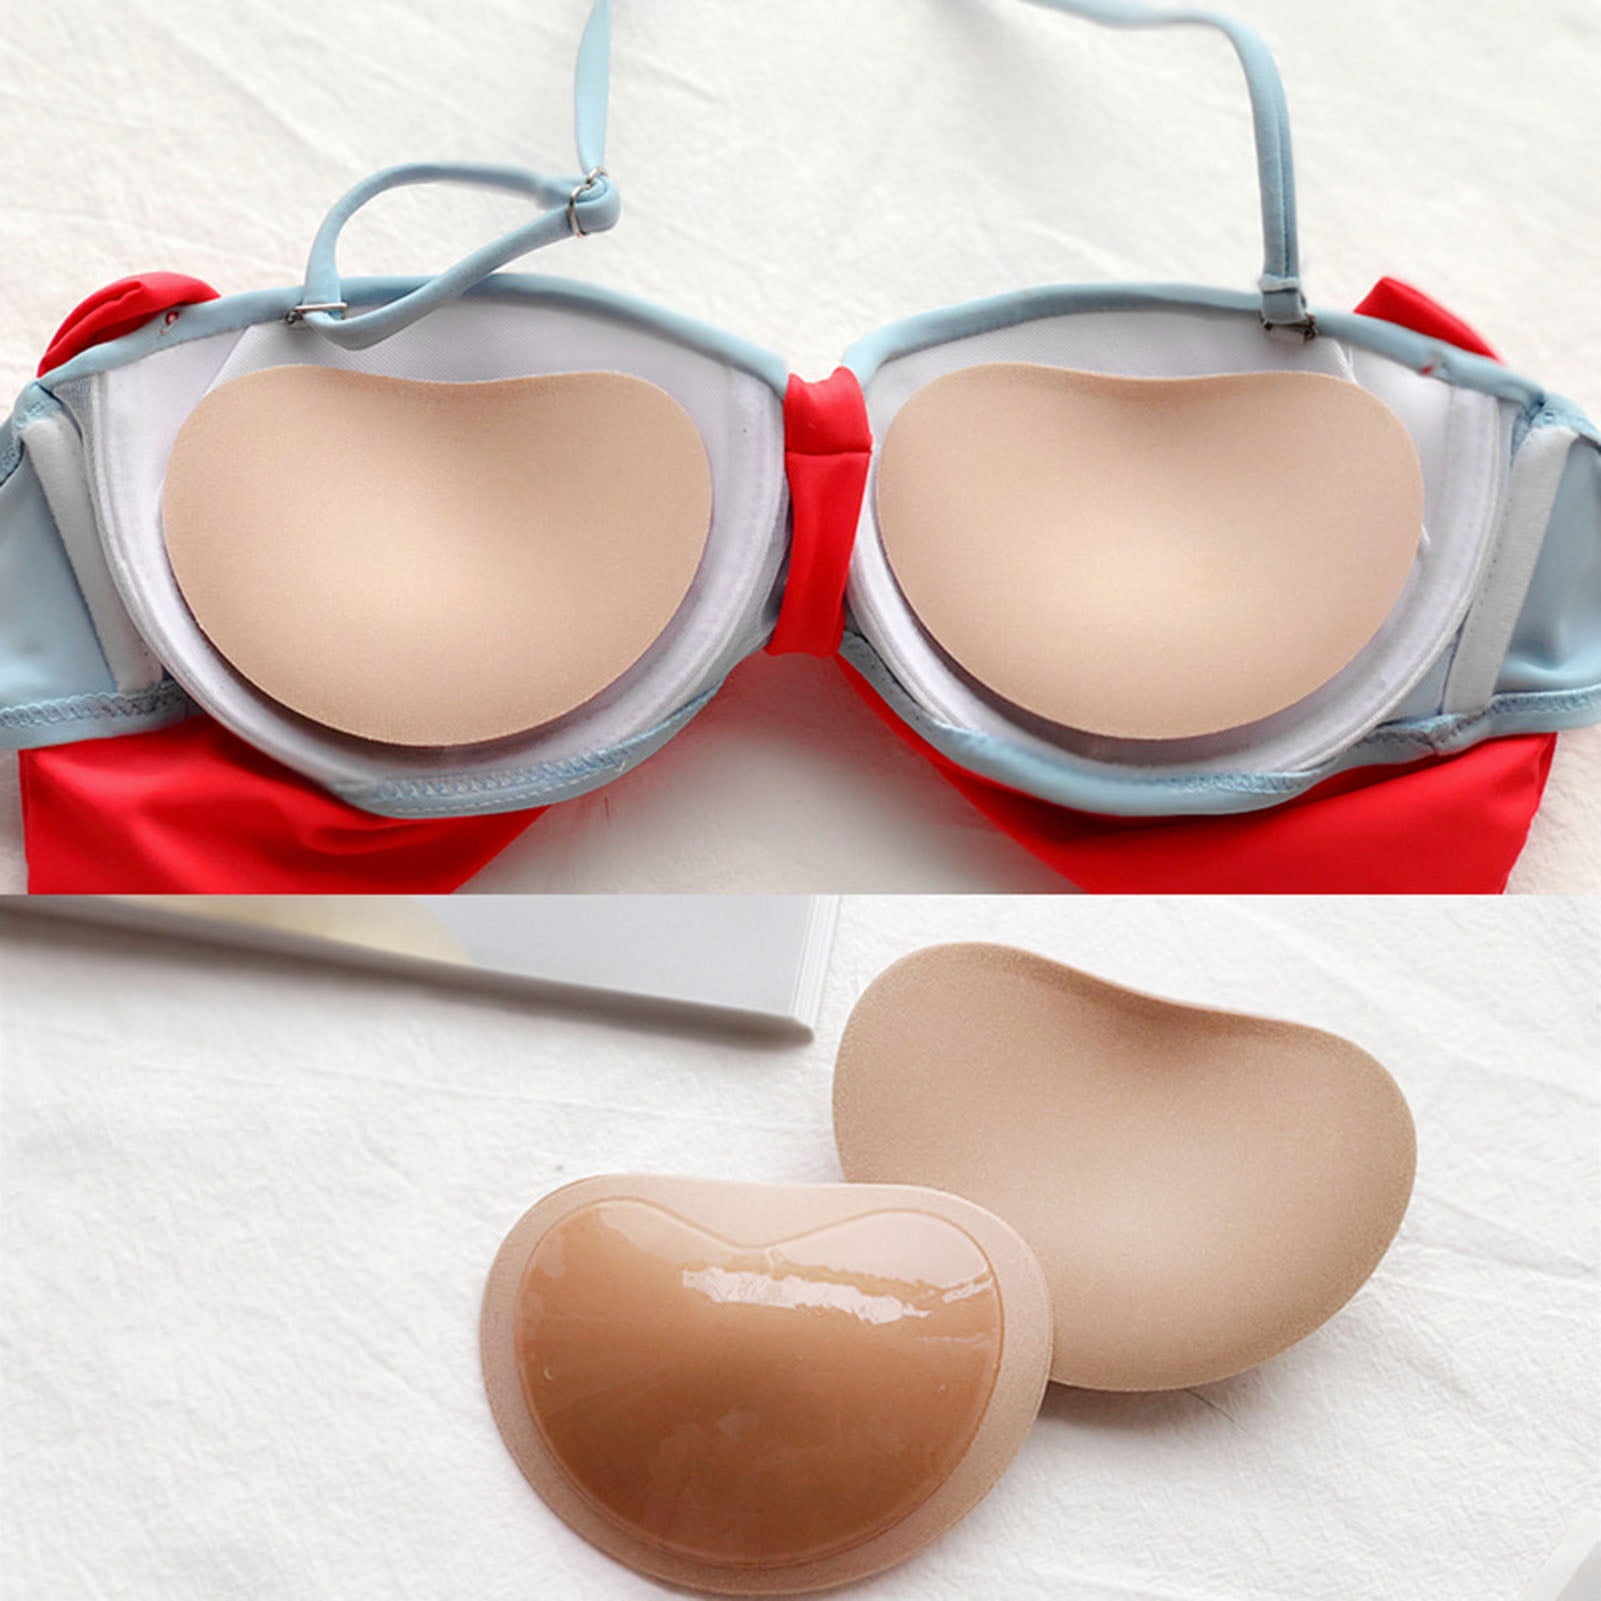 Fashion Silicone Bra Removable Pads Inserts Breast Enhancer -nude-ONE SIZE  FITS ALL